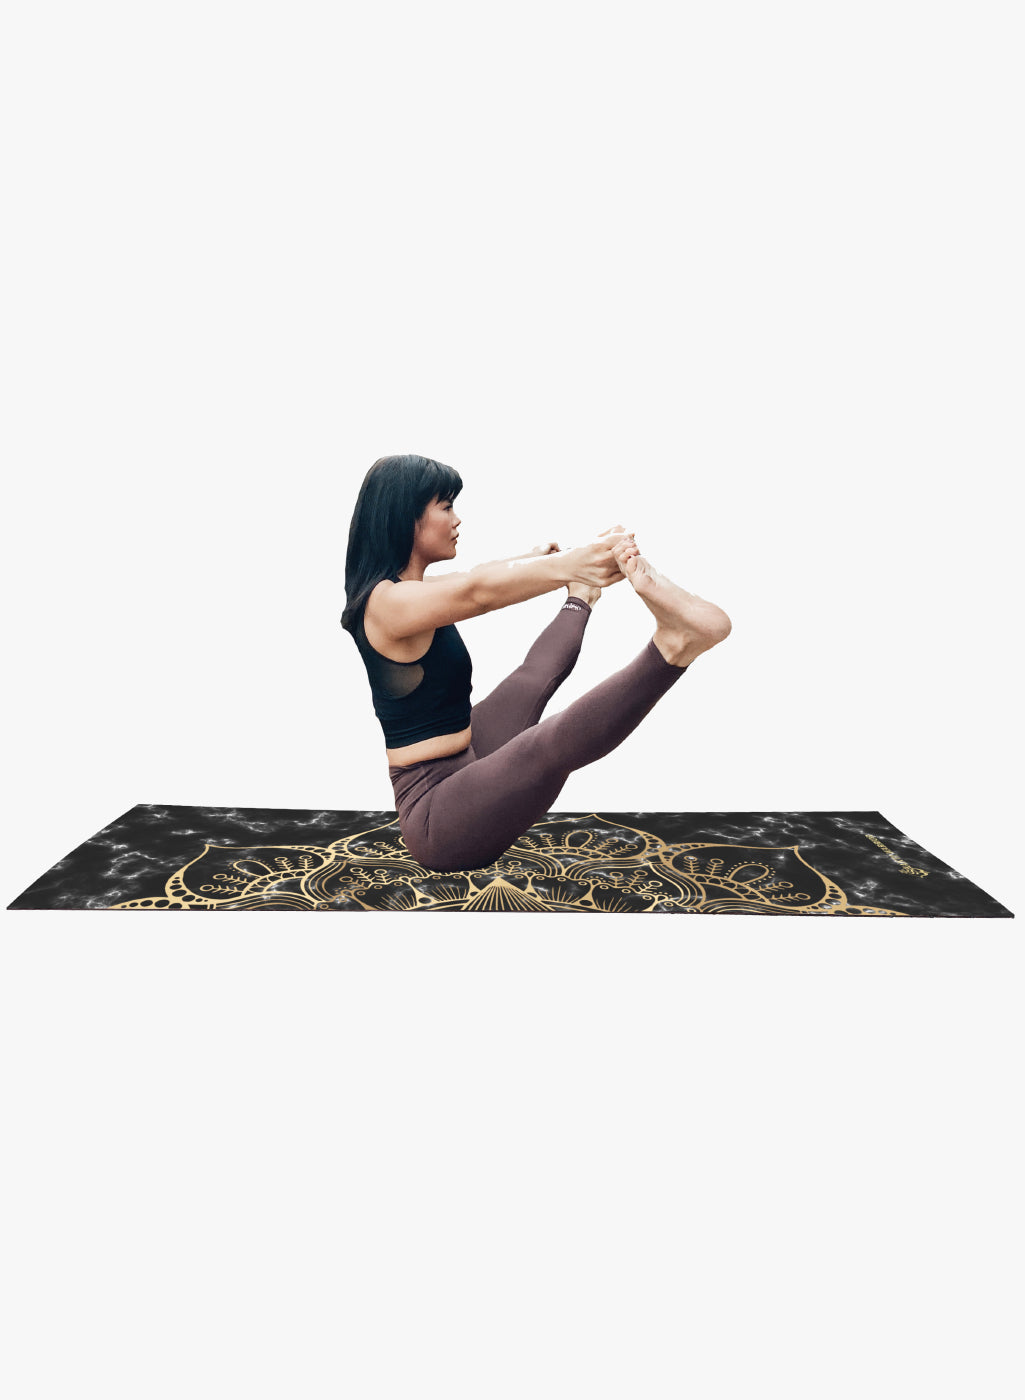 Spiritual Warrior&#39;s eco-friendly yoga mats have great grip, anti-slip, good cushioning for the knees, high quality, portable, affordable with beautiful prints